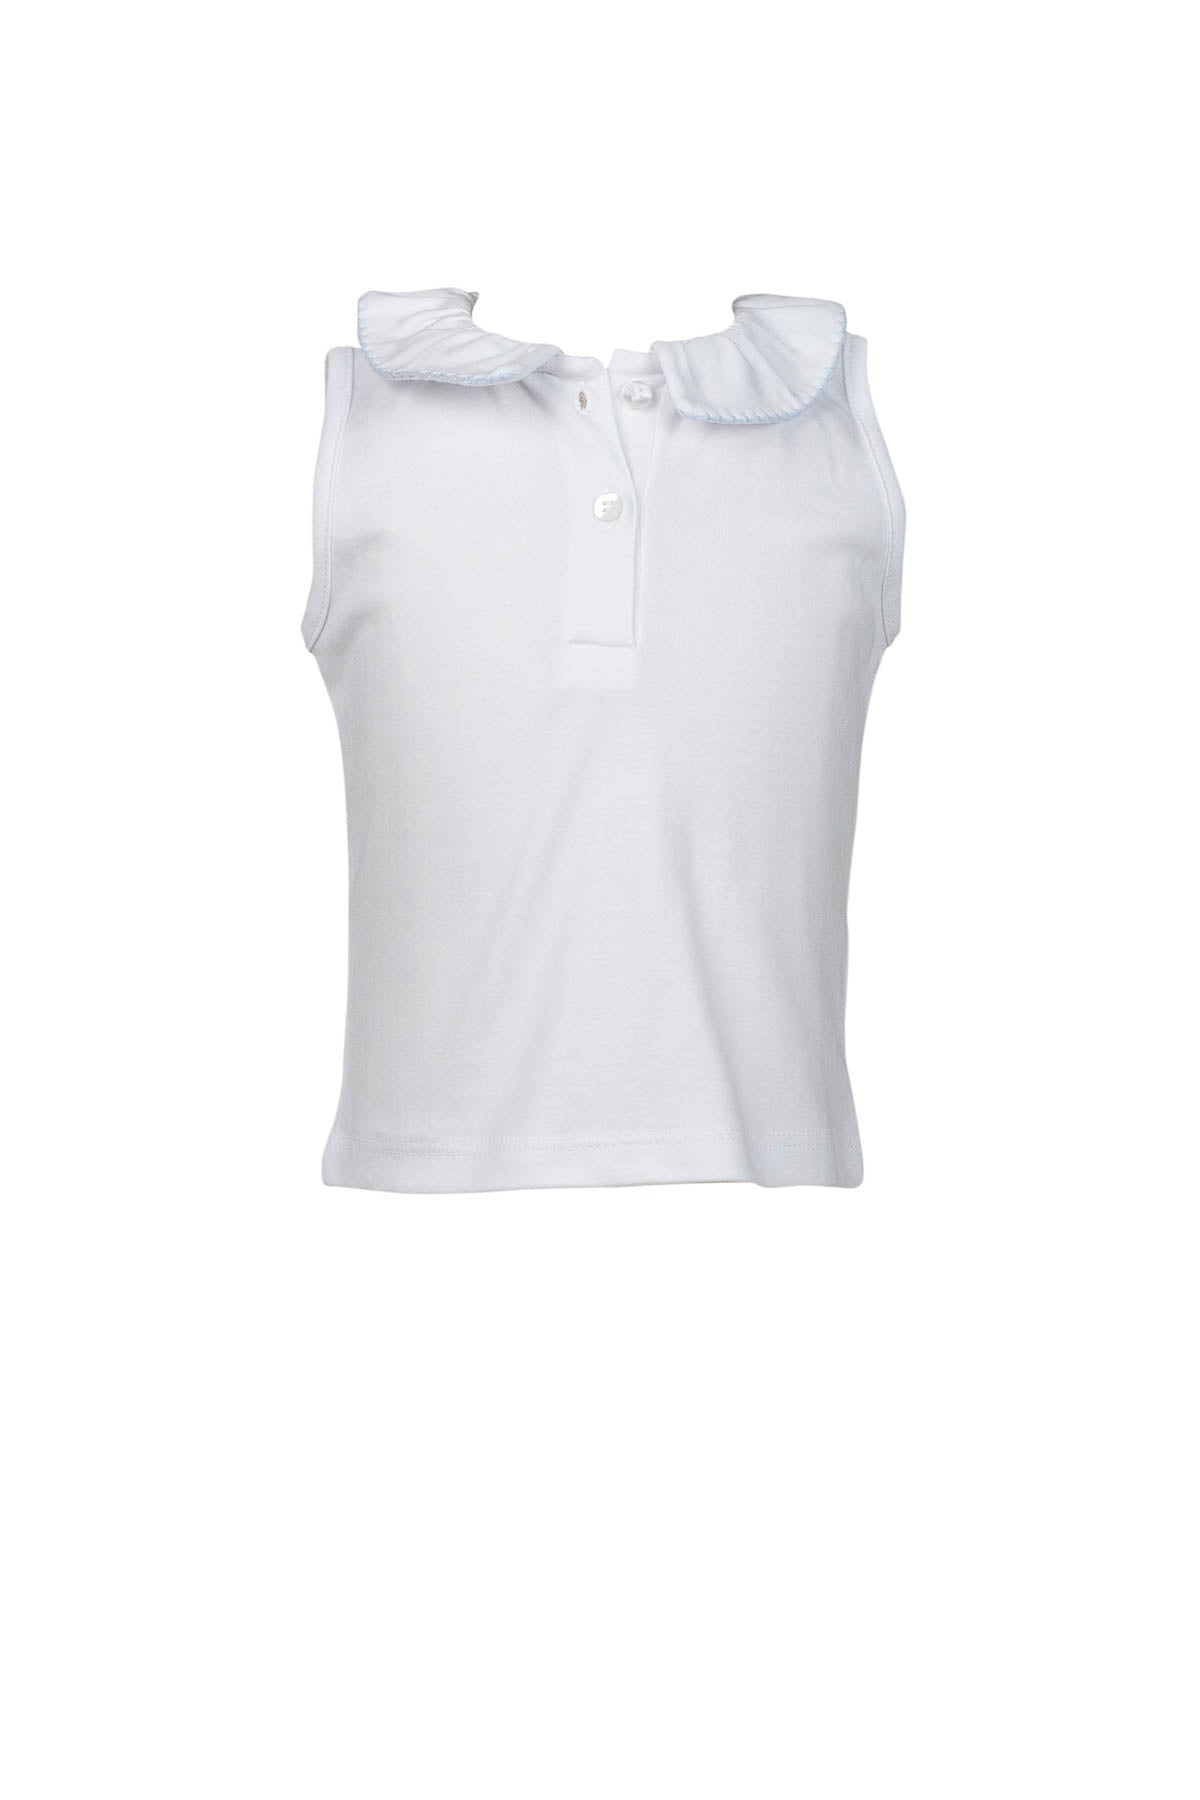 The Proper Peony White Peter Pan Top with Sky Blue Trim - Little Birdies